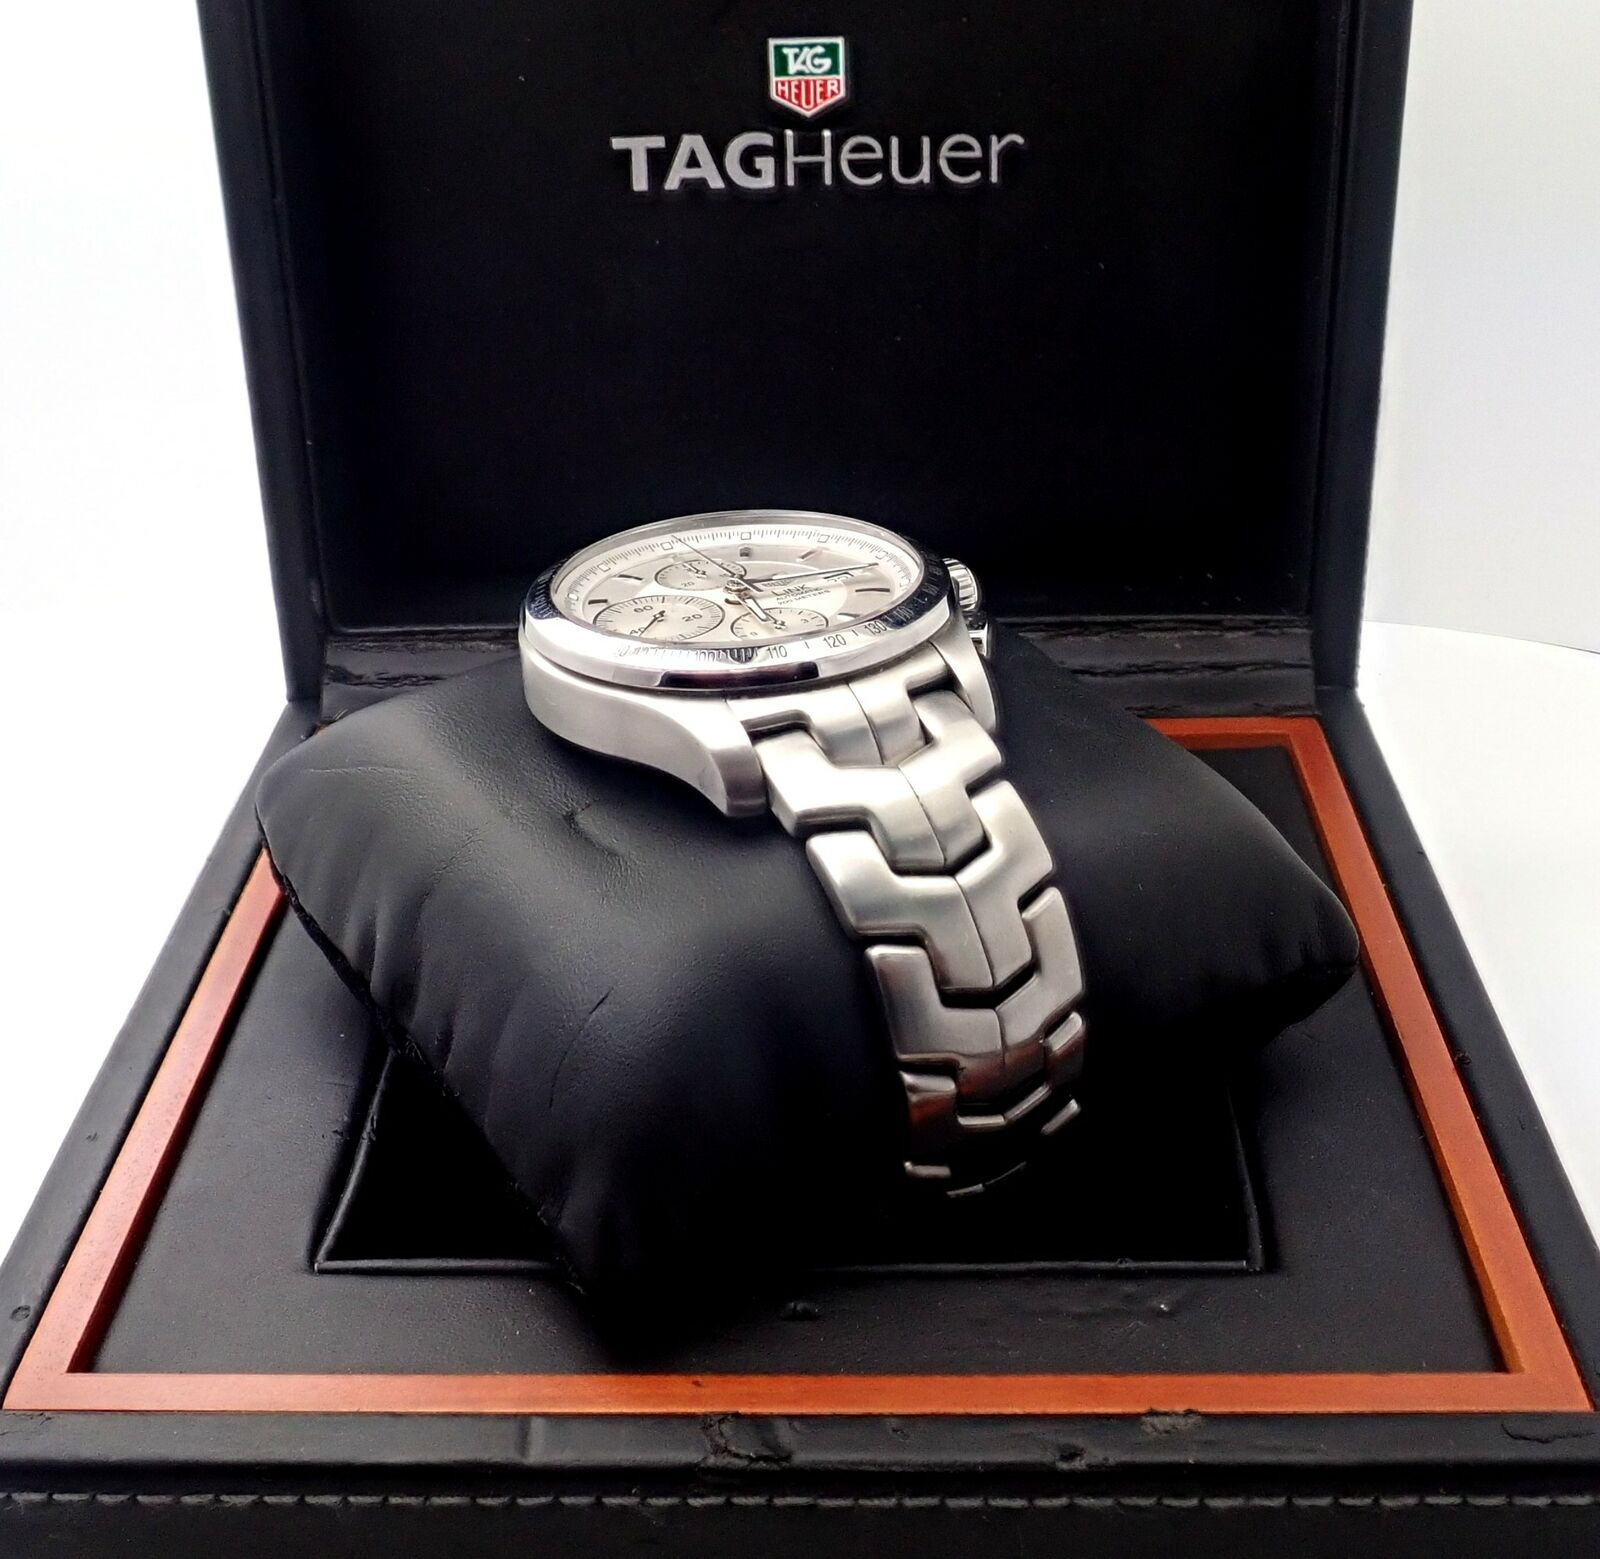 Tag Heuer Jewelry & Watches:Watches, Parts & Accessories:Watches:Wristwatches Authentic Tag Heuer Link Automatic Calibre 16 Cjf2111-0 Exhibition Mens Watch